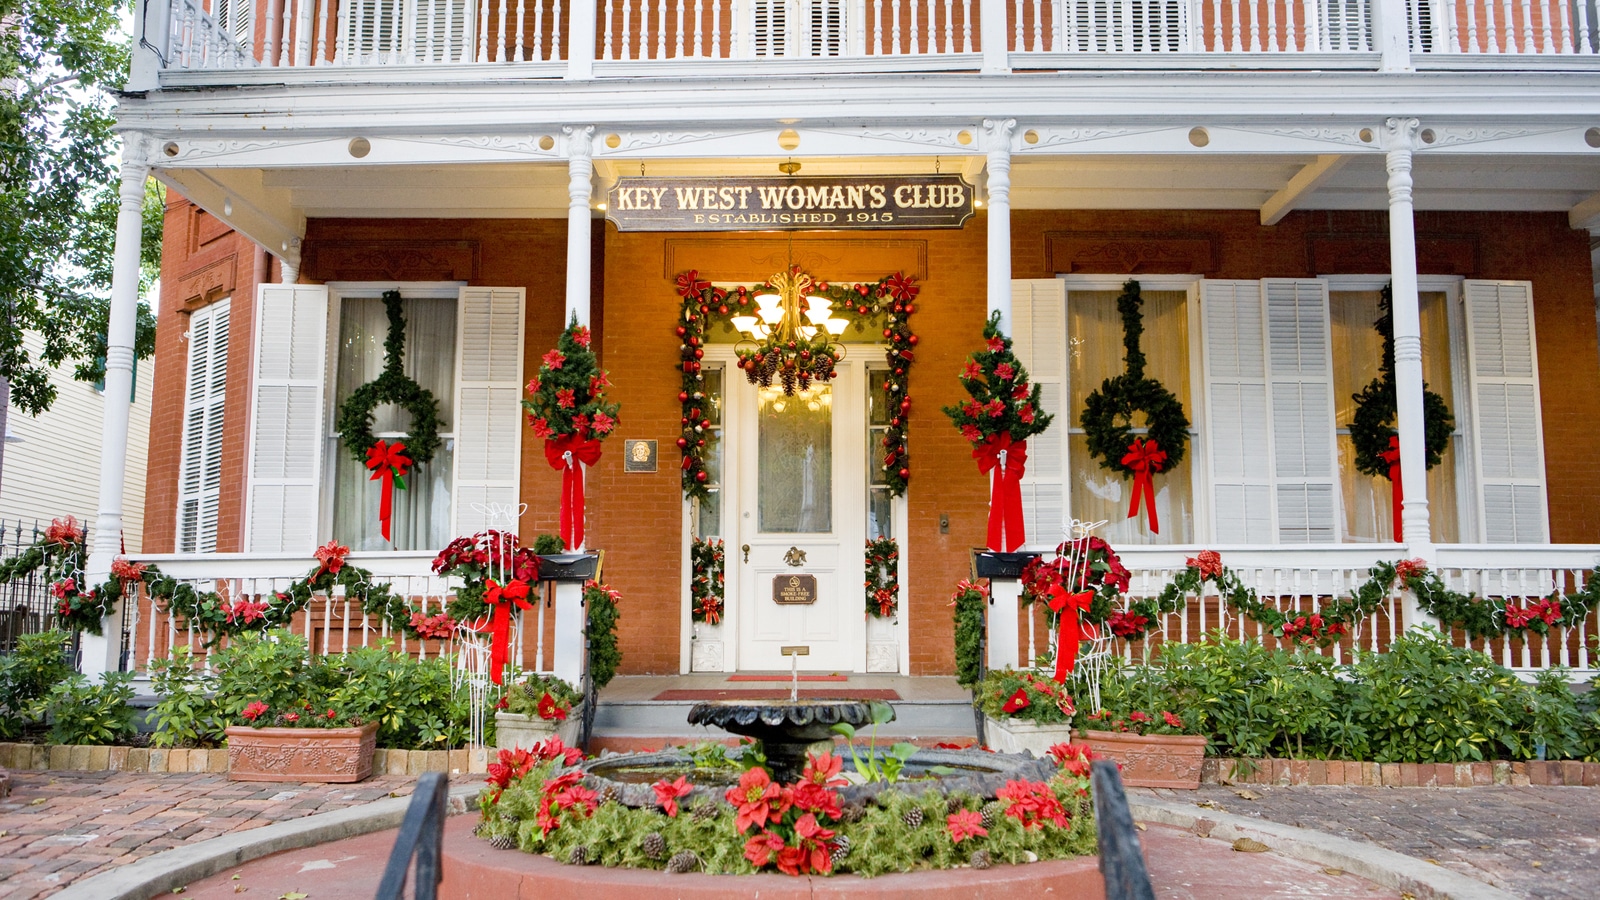 December In Key West - Christmas Decorations